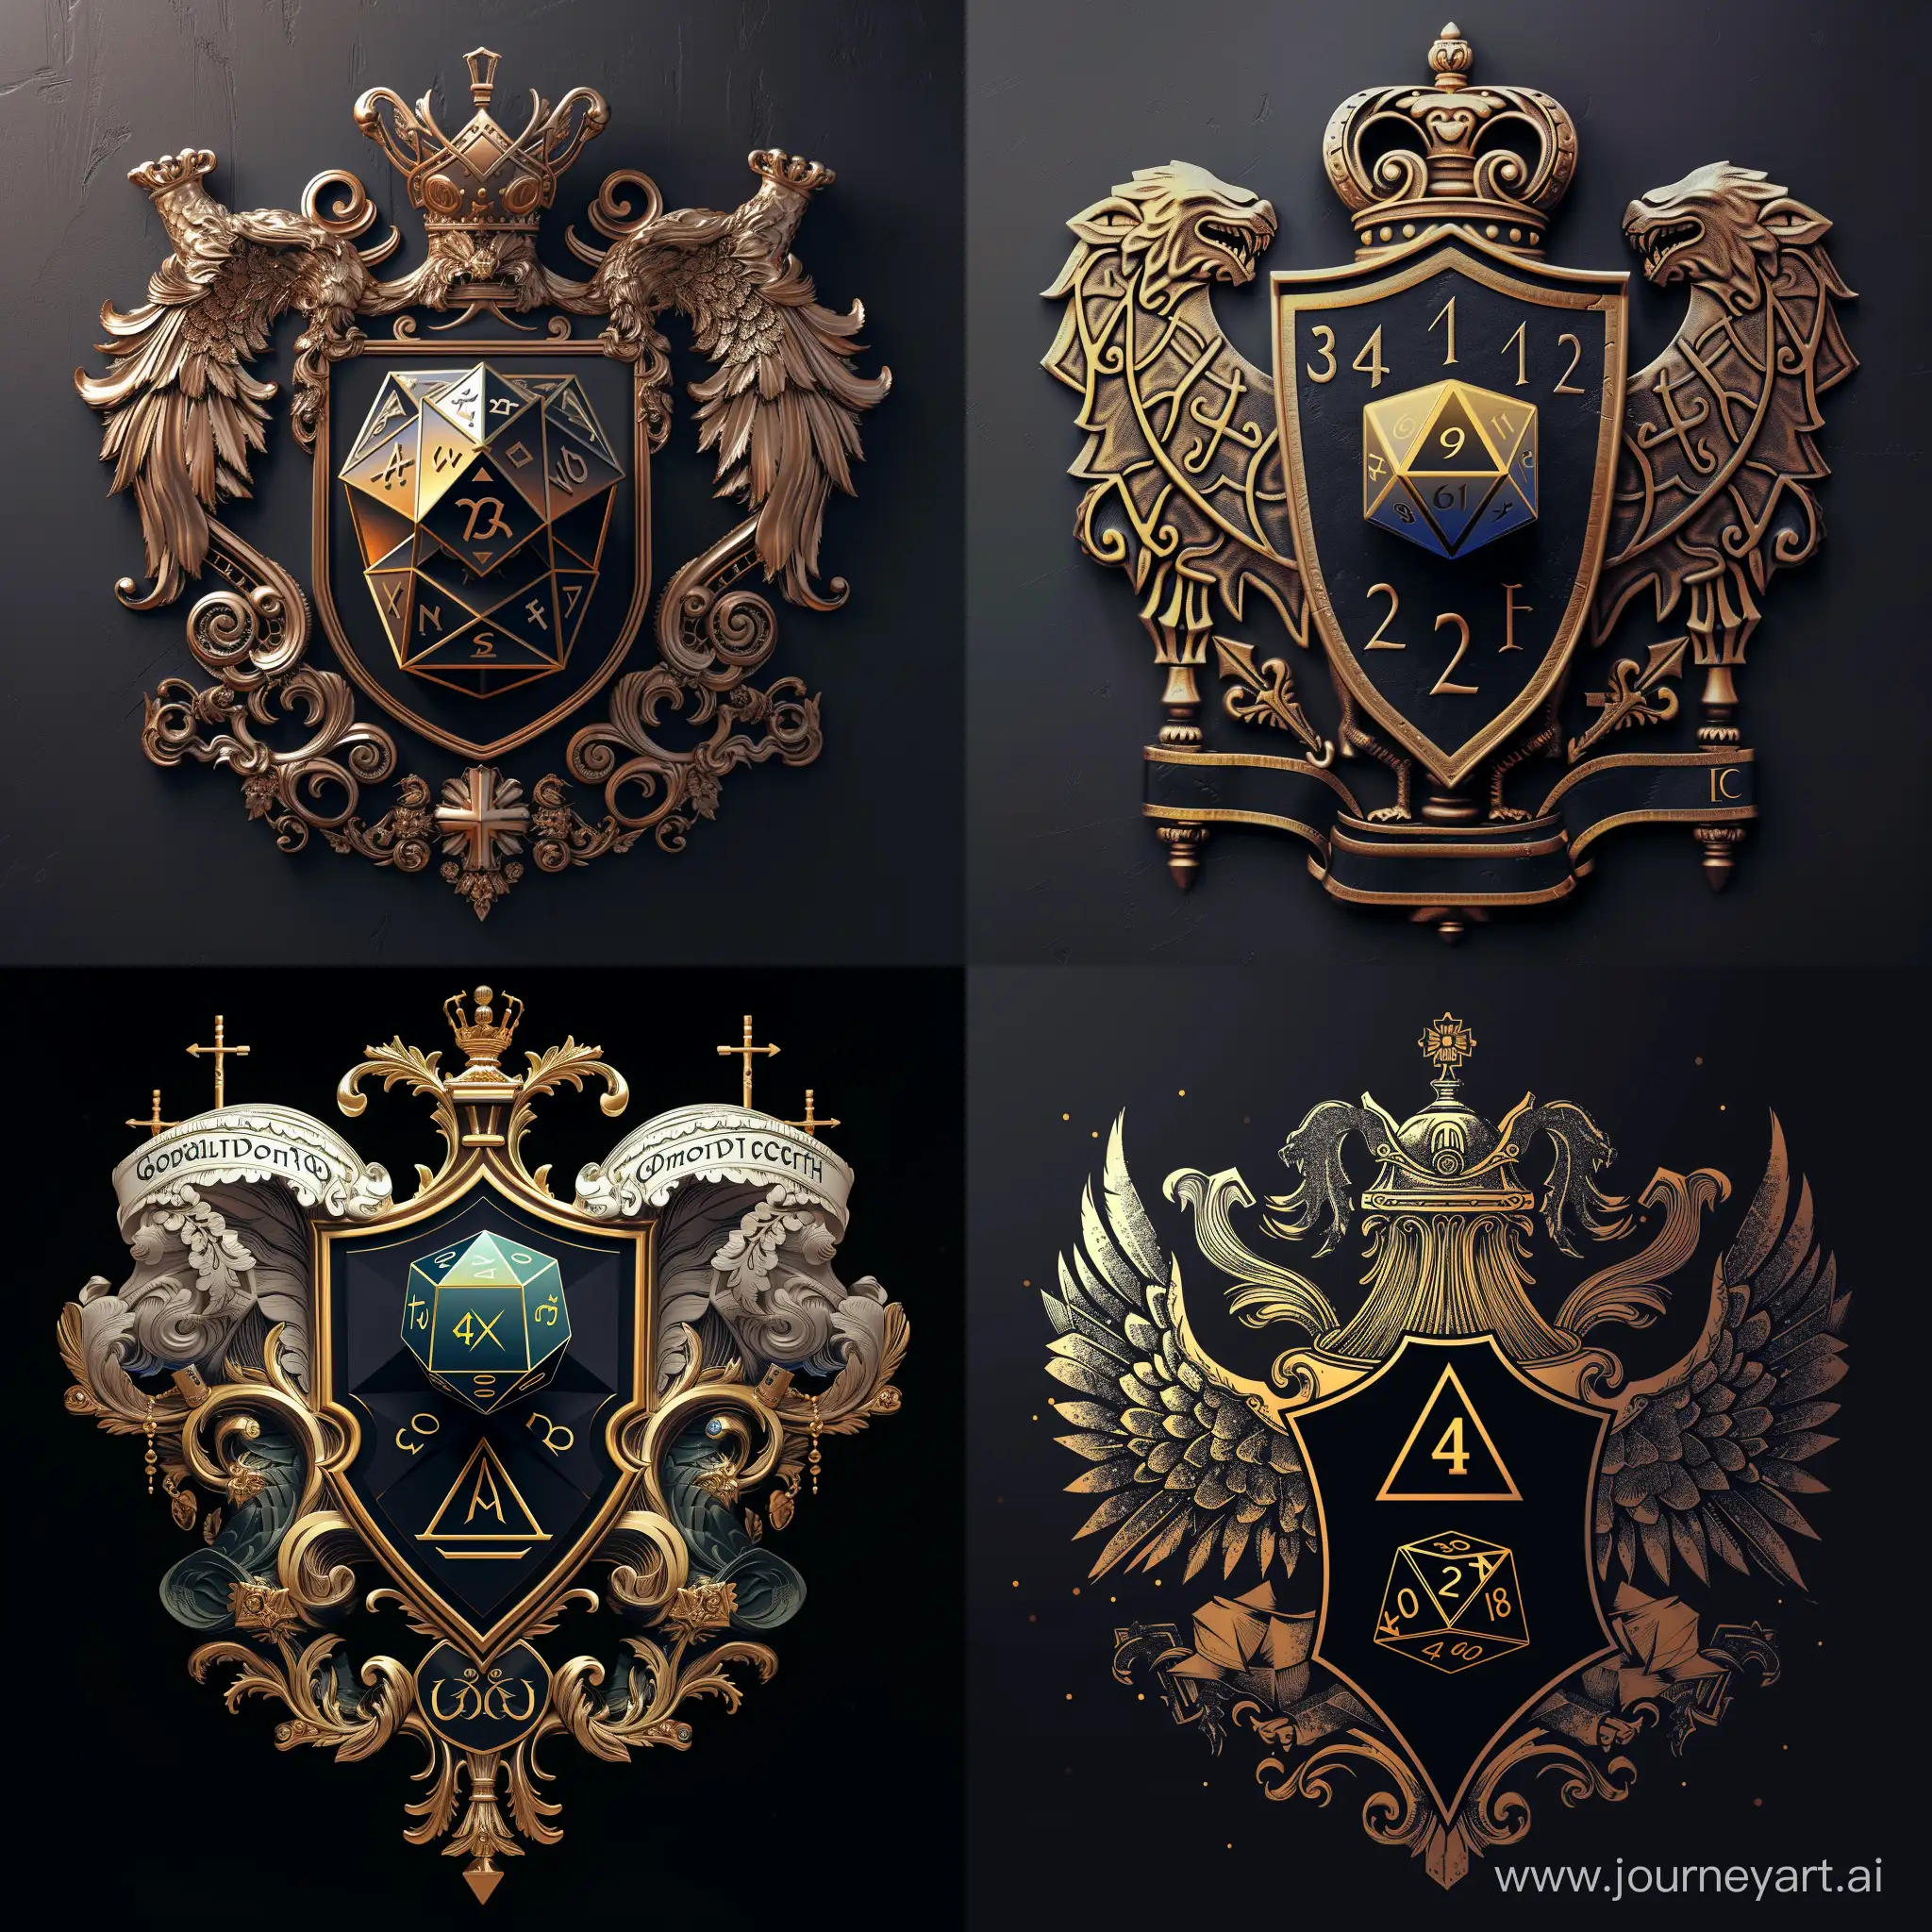 Exquisite-Coat-of-Arms-with-Central-Gradient-d20-HighQuality-4K-Image